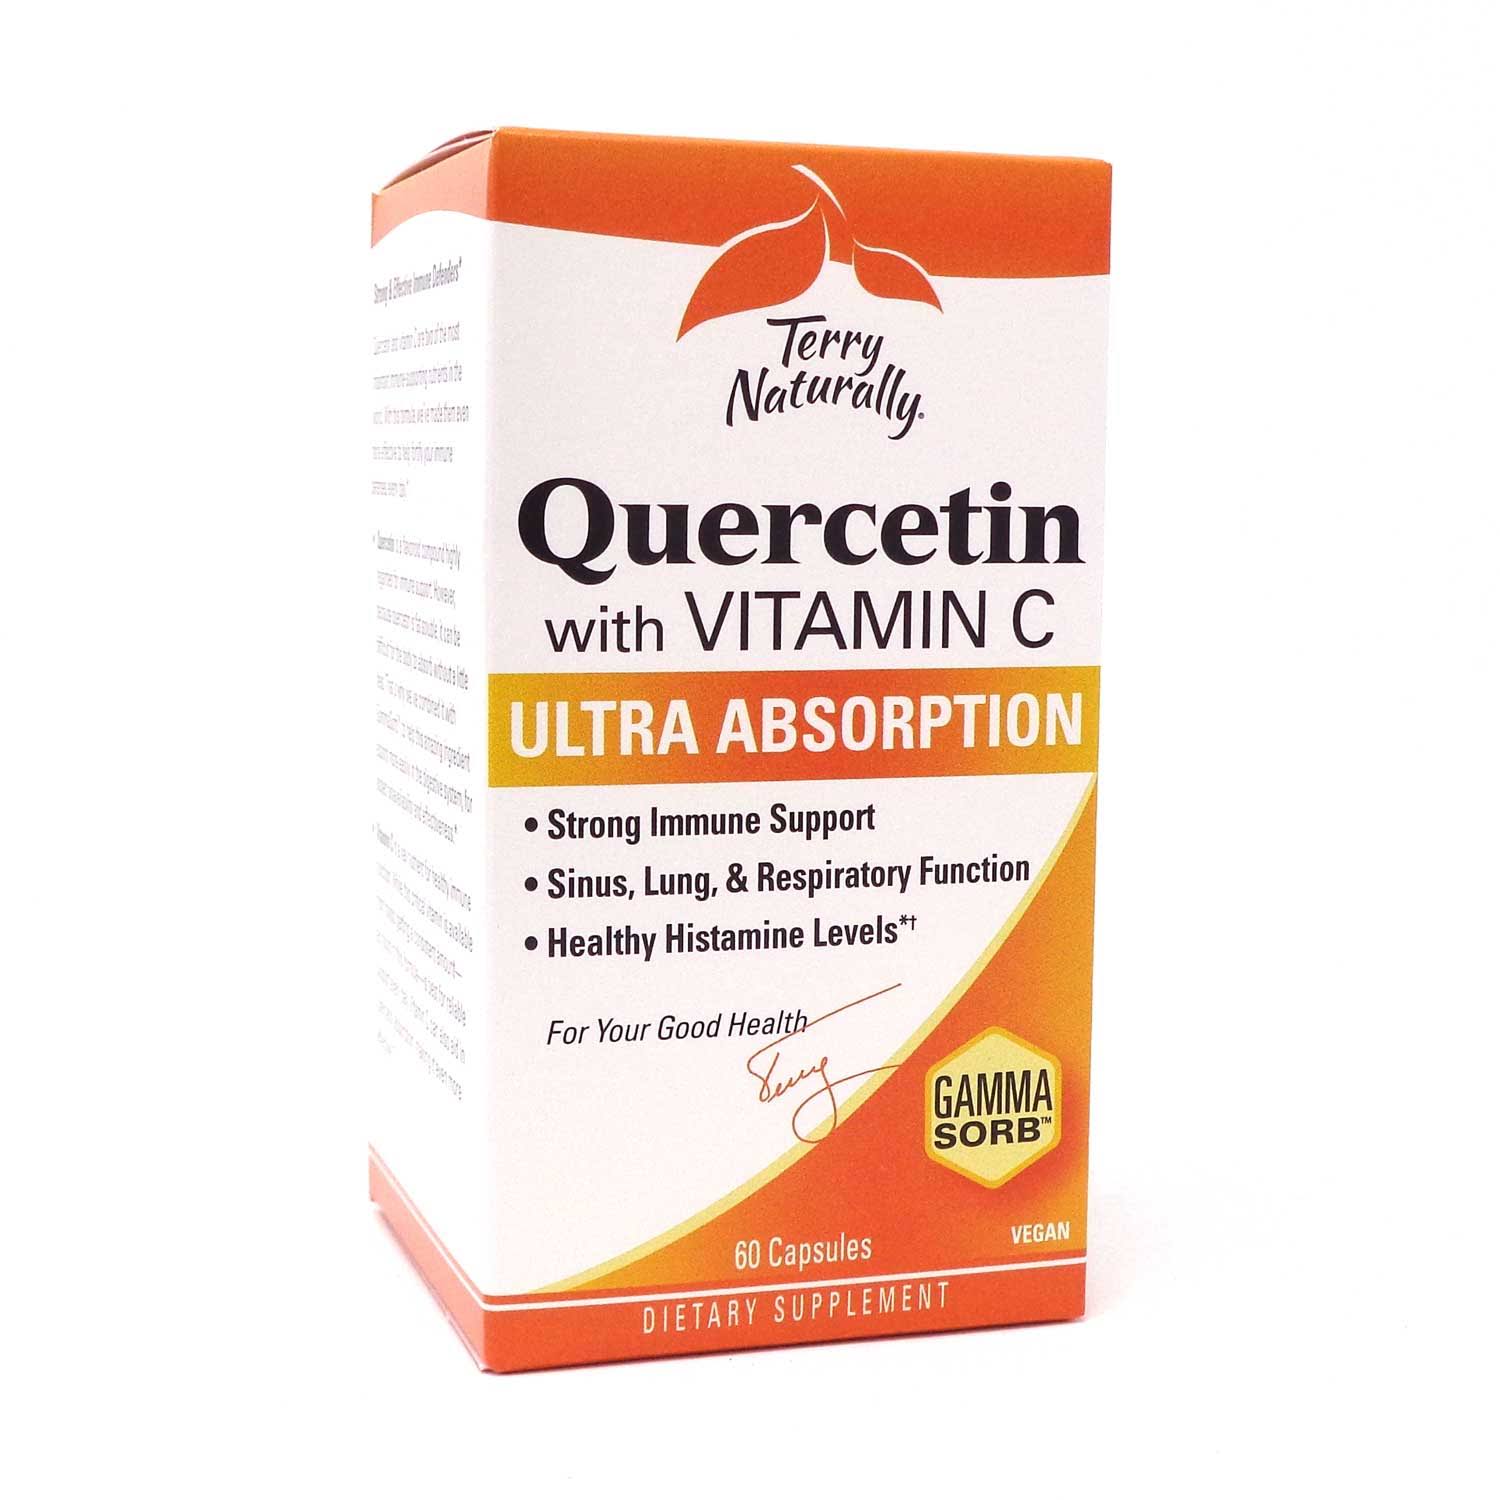 Terry Naturally Quercetin with Vitamin C - Ultra Absorption NEW! 60 Caps